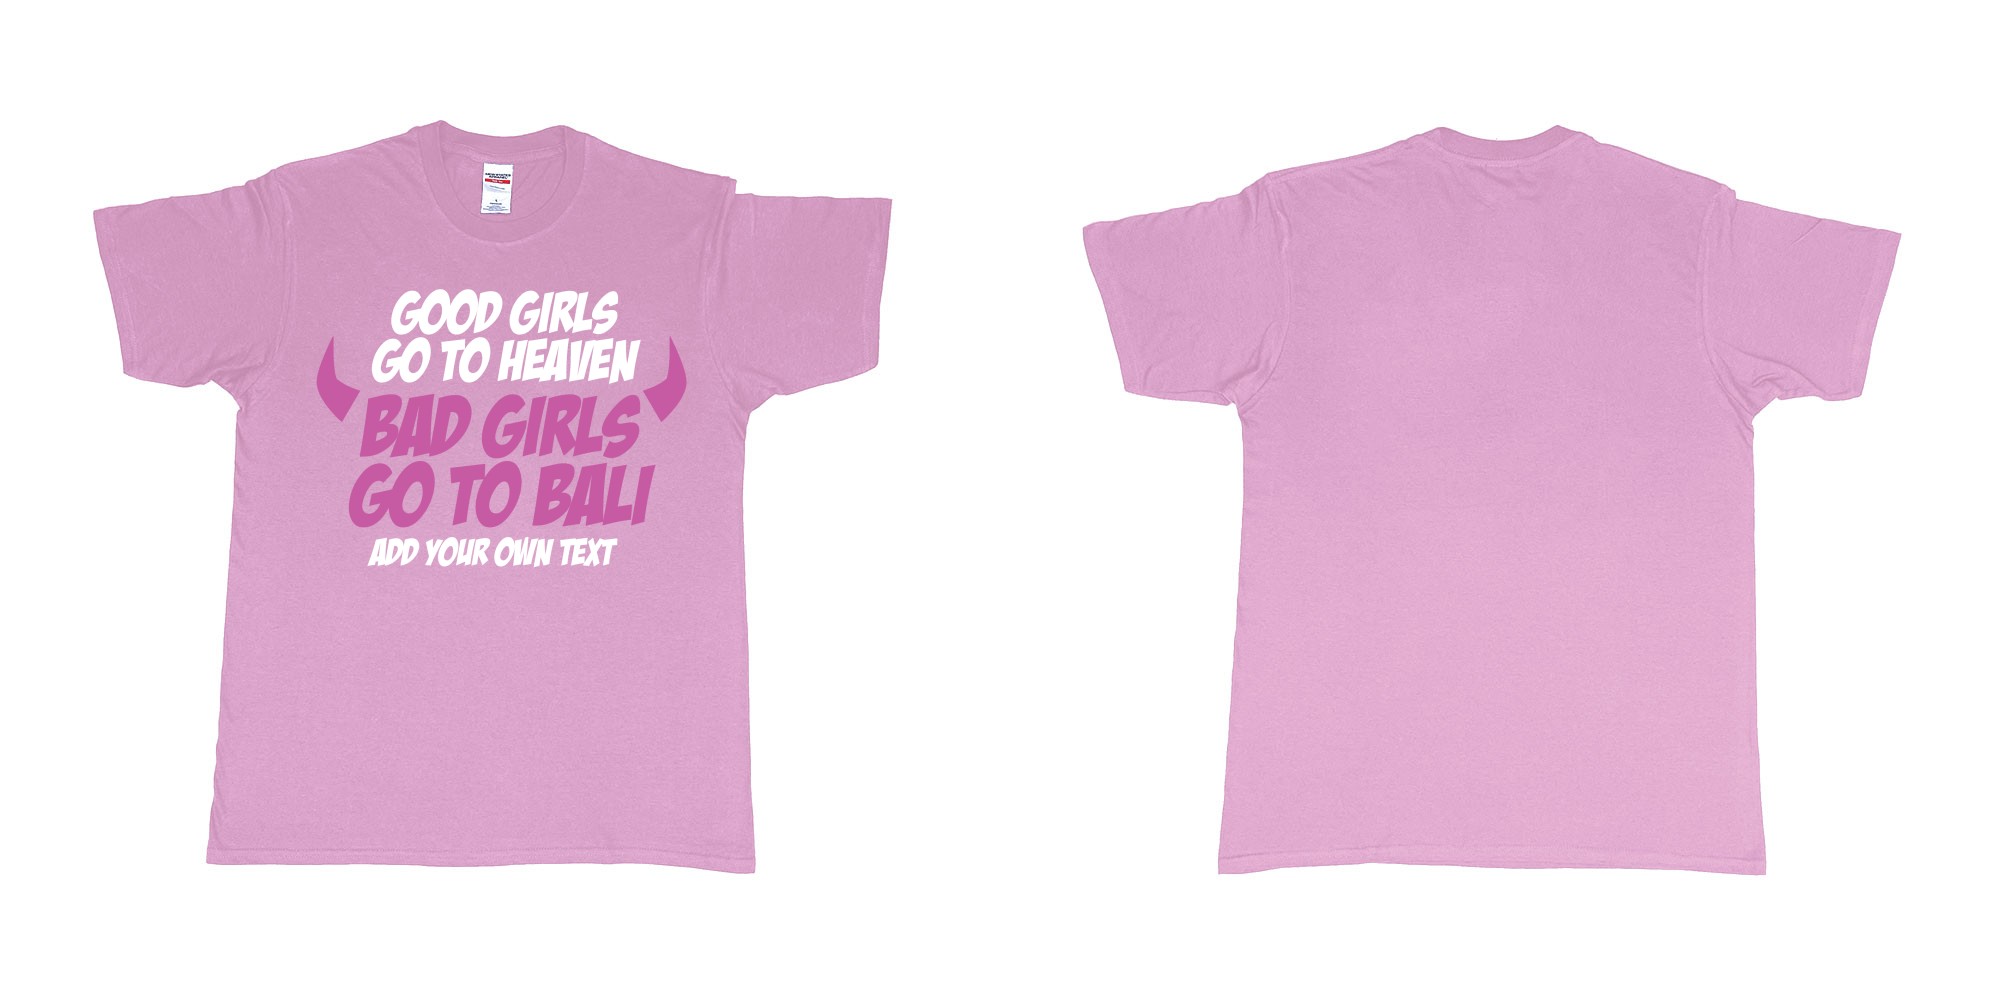 Custom tshirt design good girls go to heaven bad girls go to bali in fabric color light-pink choice your own text made in Bali by The Pirate Way